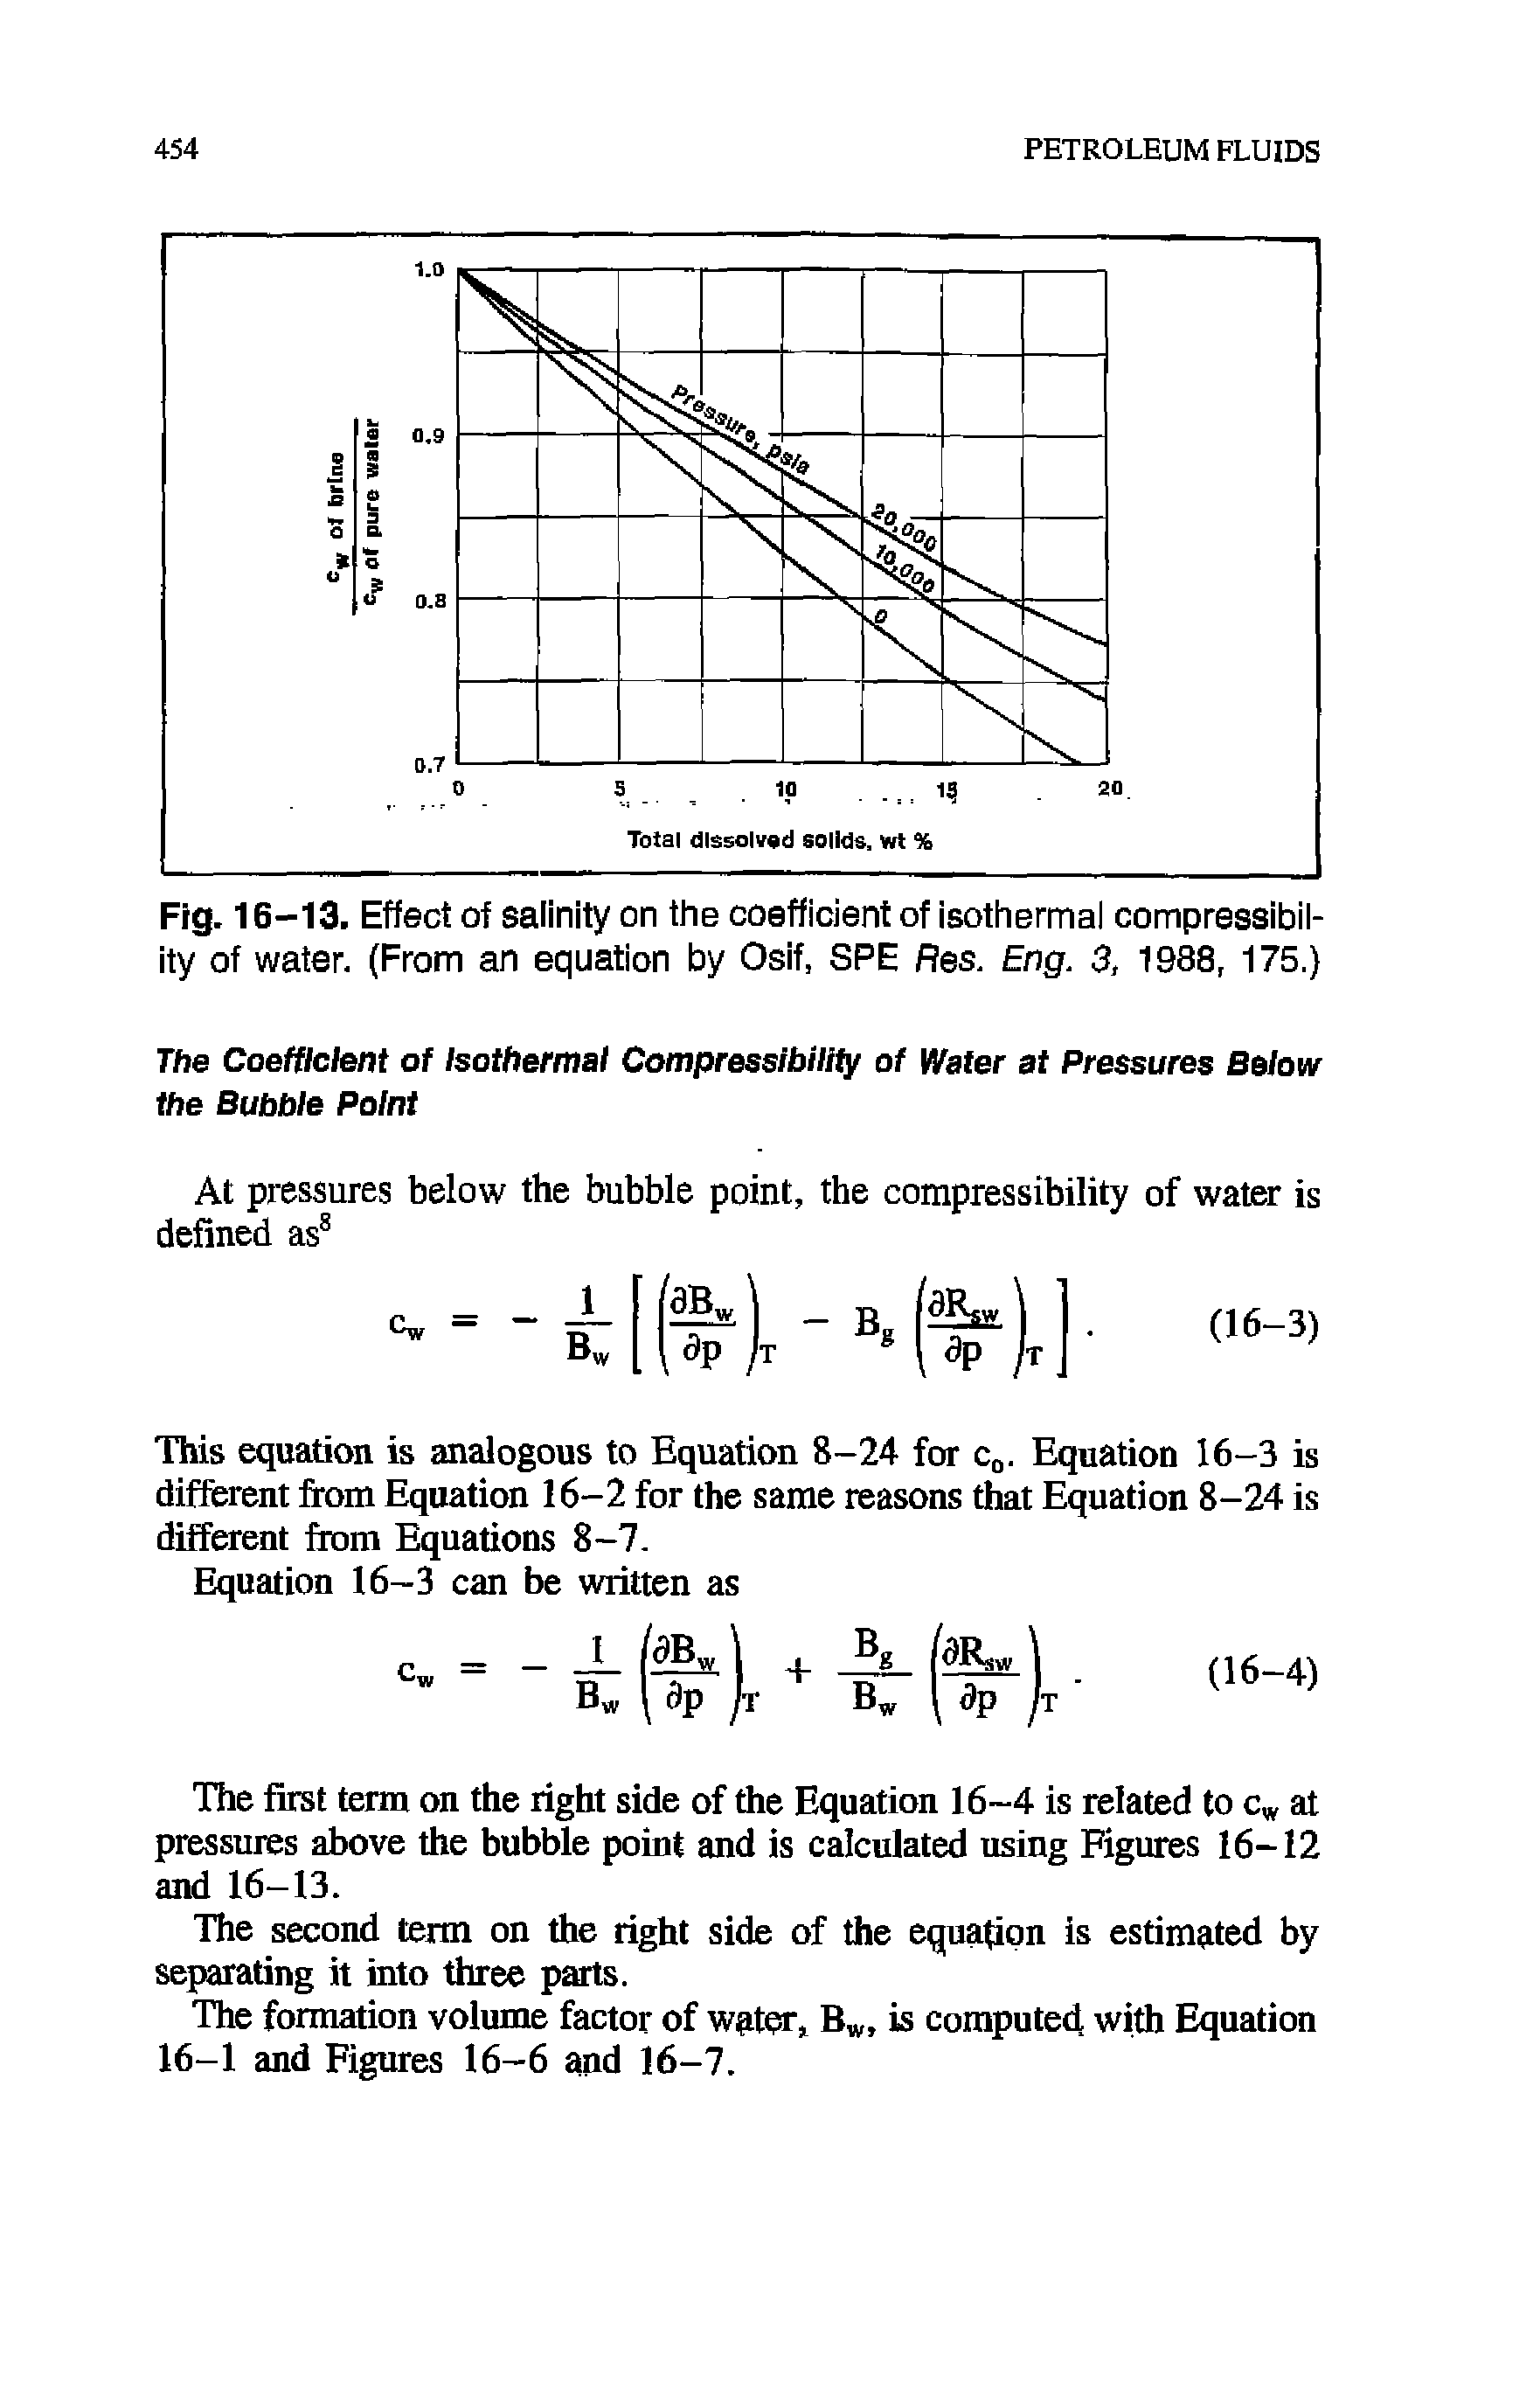 Fig. 16-13. Effect of salinity on the coefficient of isothermal compressibility of water. (From an equation by Osif, SPE Res. Eng. 3, 1988, 175.)...